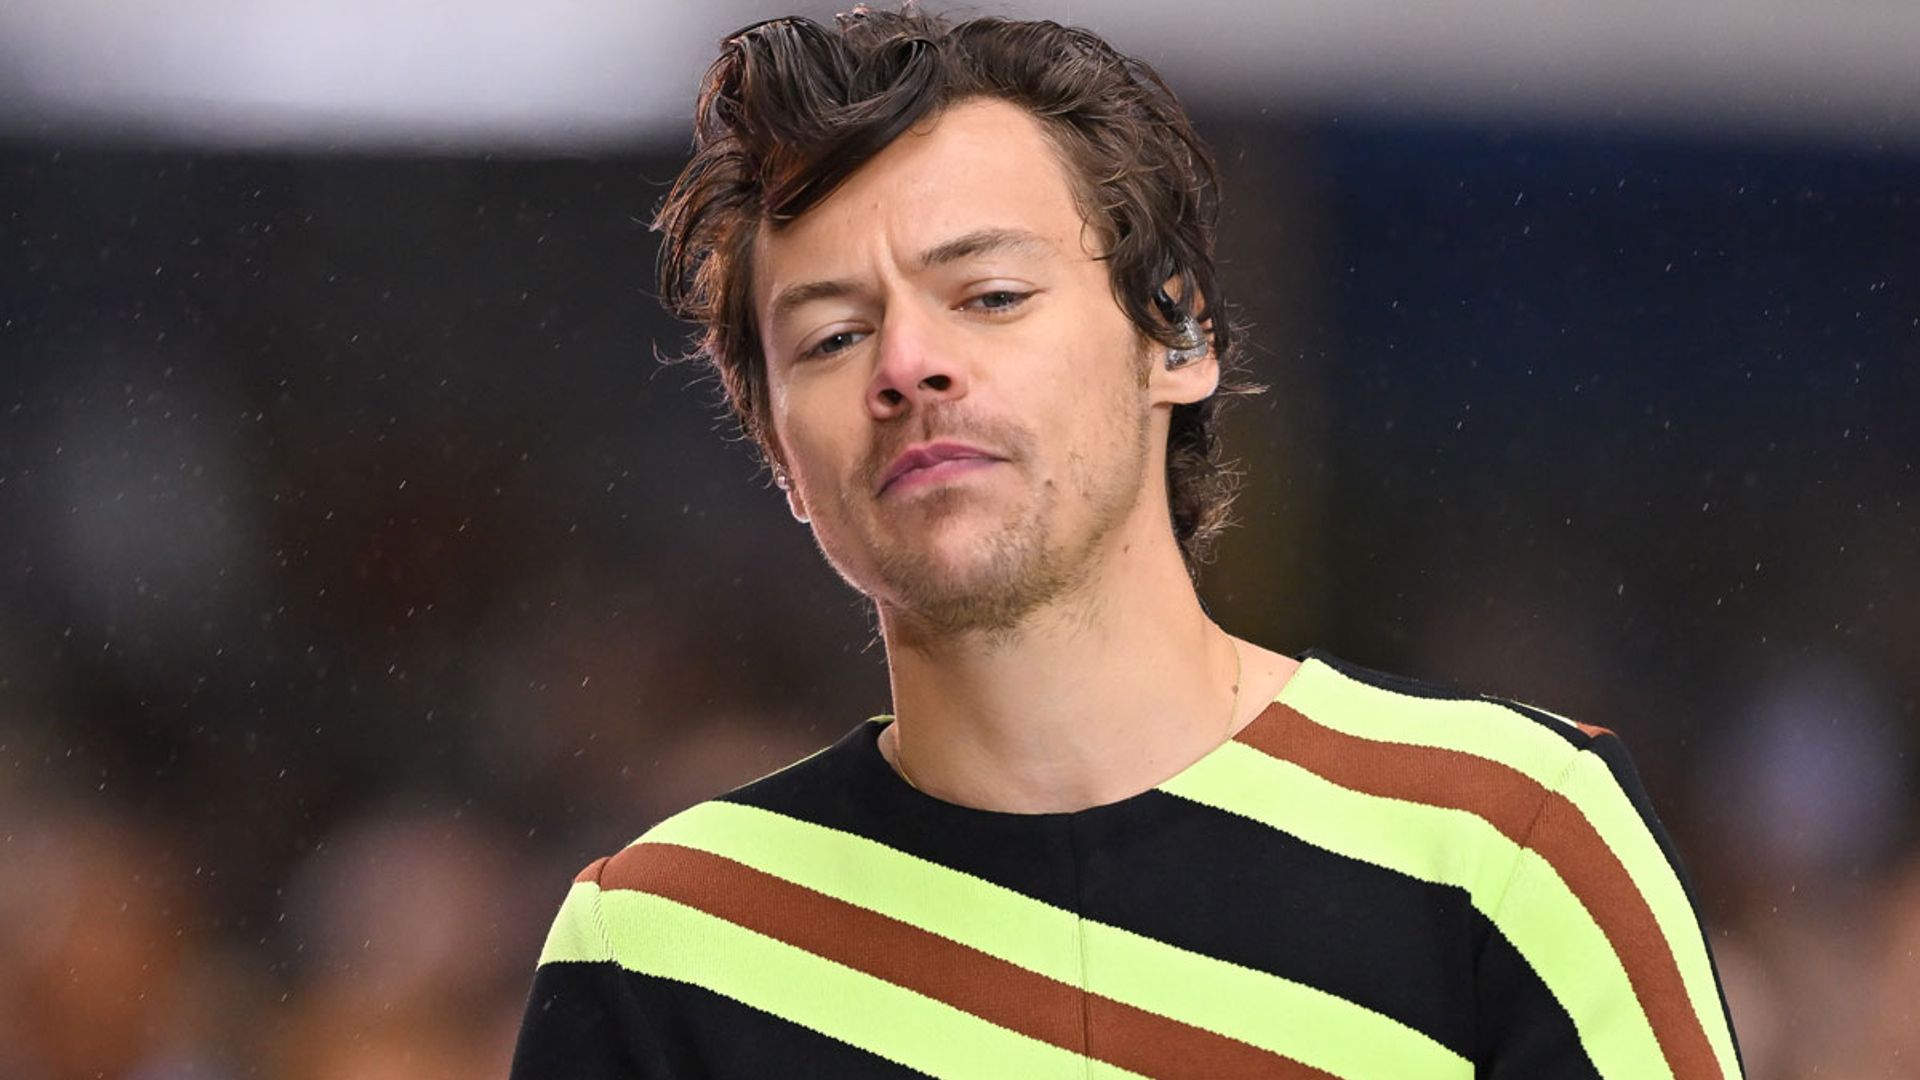 Harry Styles' fans confused by hospital drip photo amid album launch